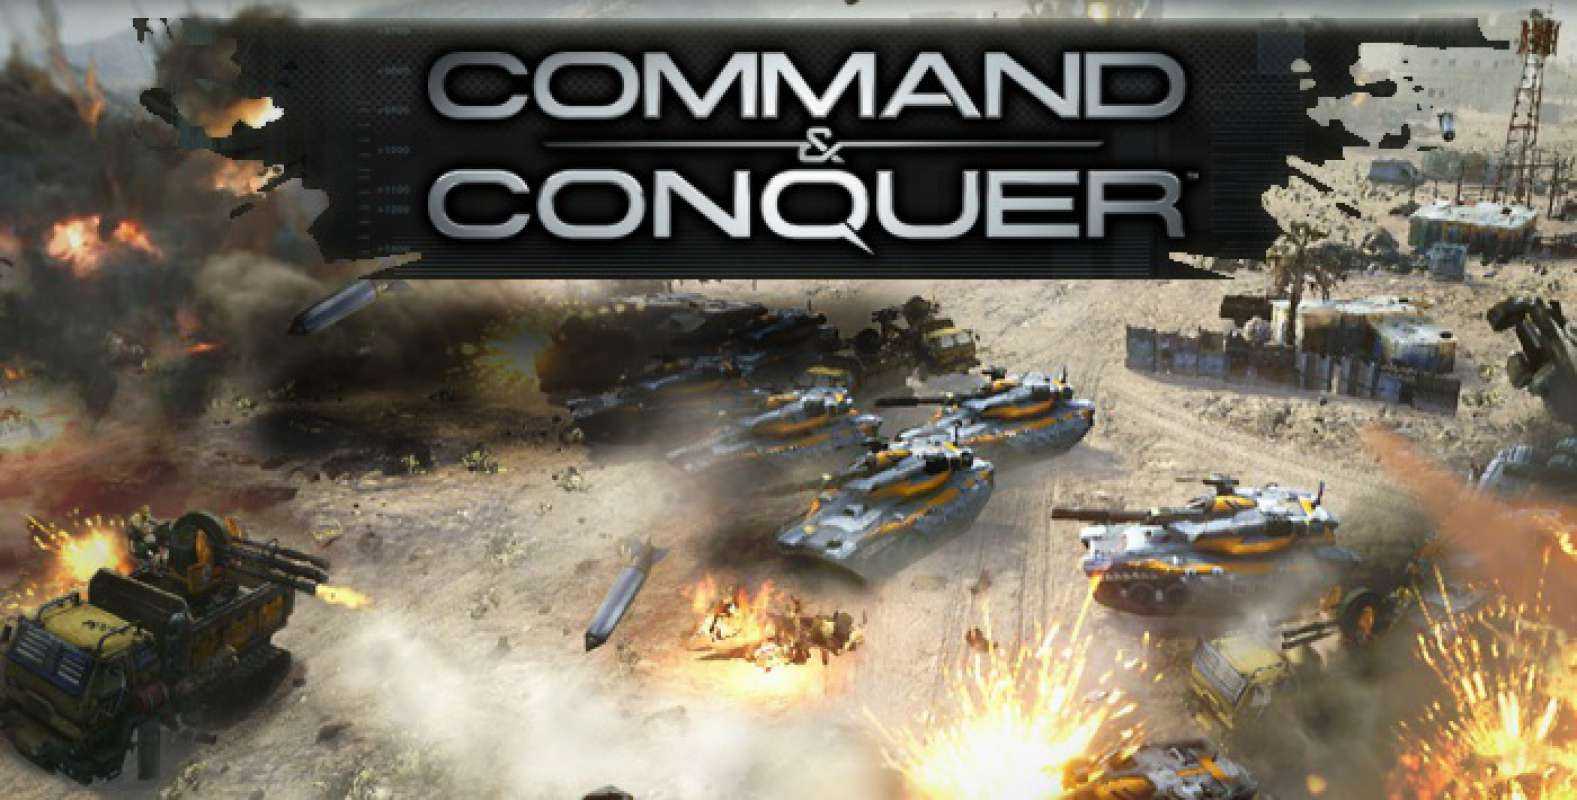 Command and Conquer Free2Play